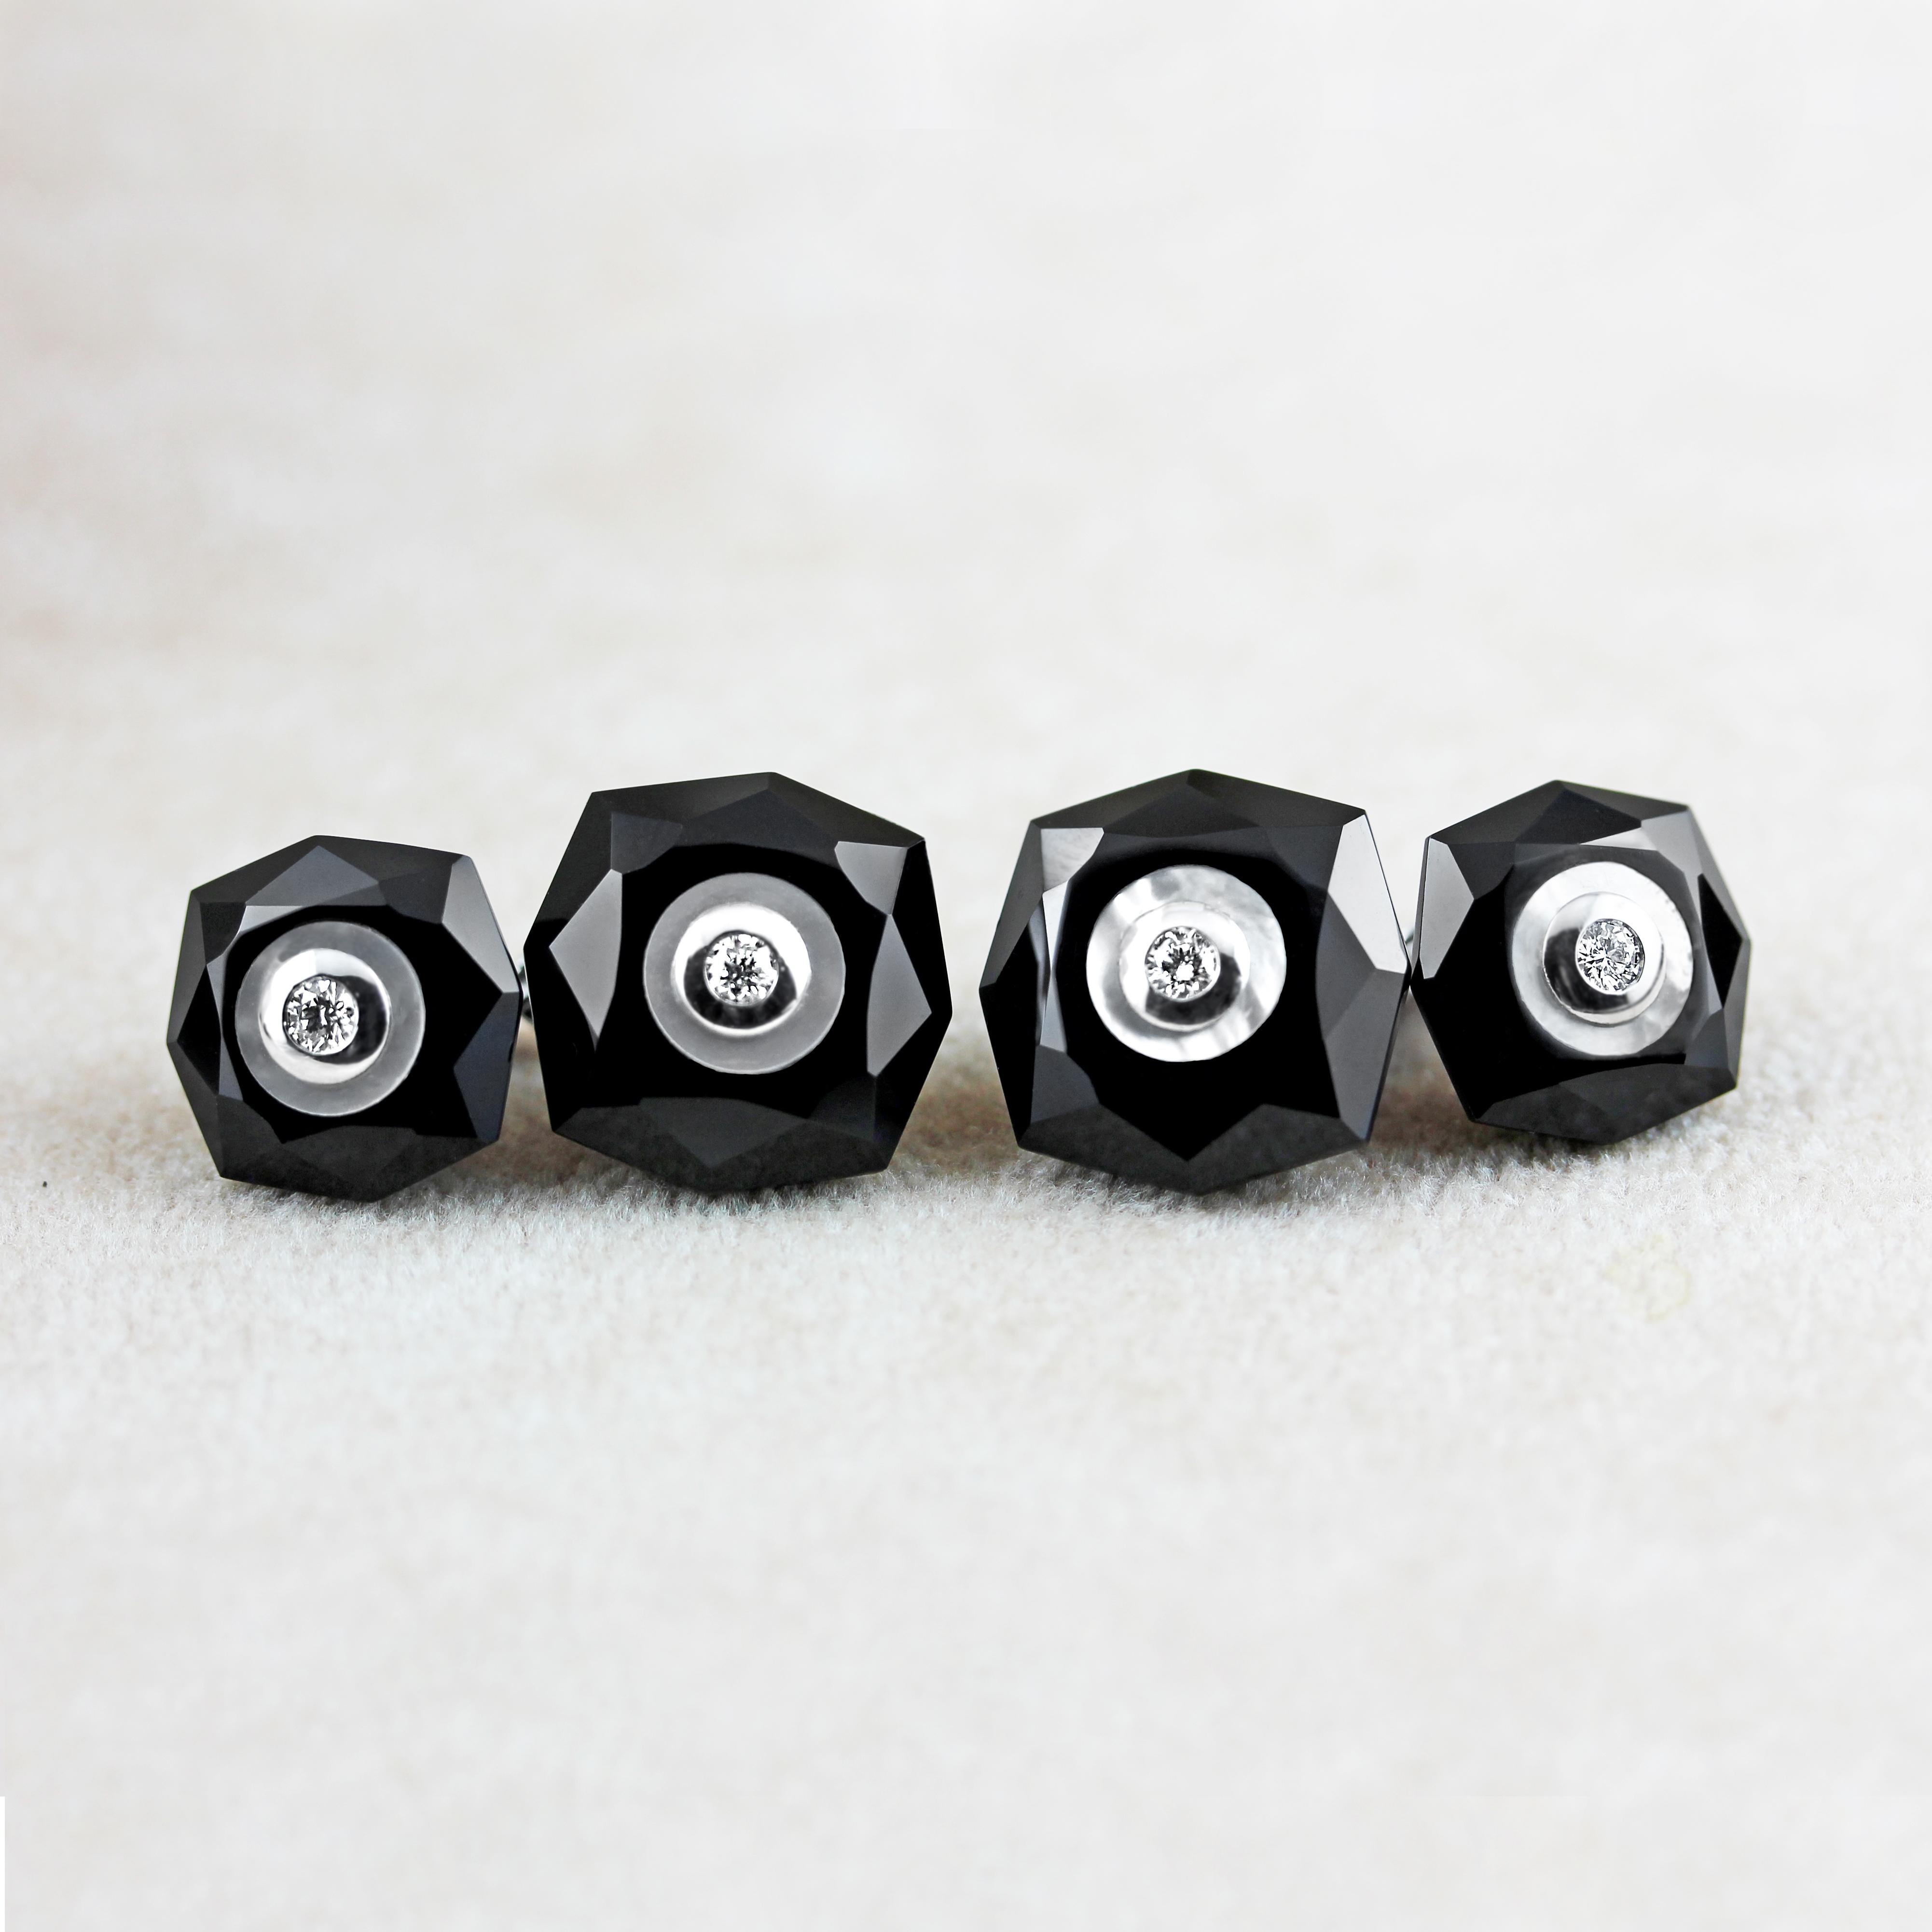 The striking contrasting color combination of the black onyx with the delicate shimmer of the mother of pearl gives character to these exquisite cufflinks, in which both front face and toggle are shaped as a multifaceted octagon. 
The center of each